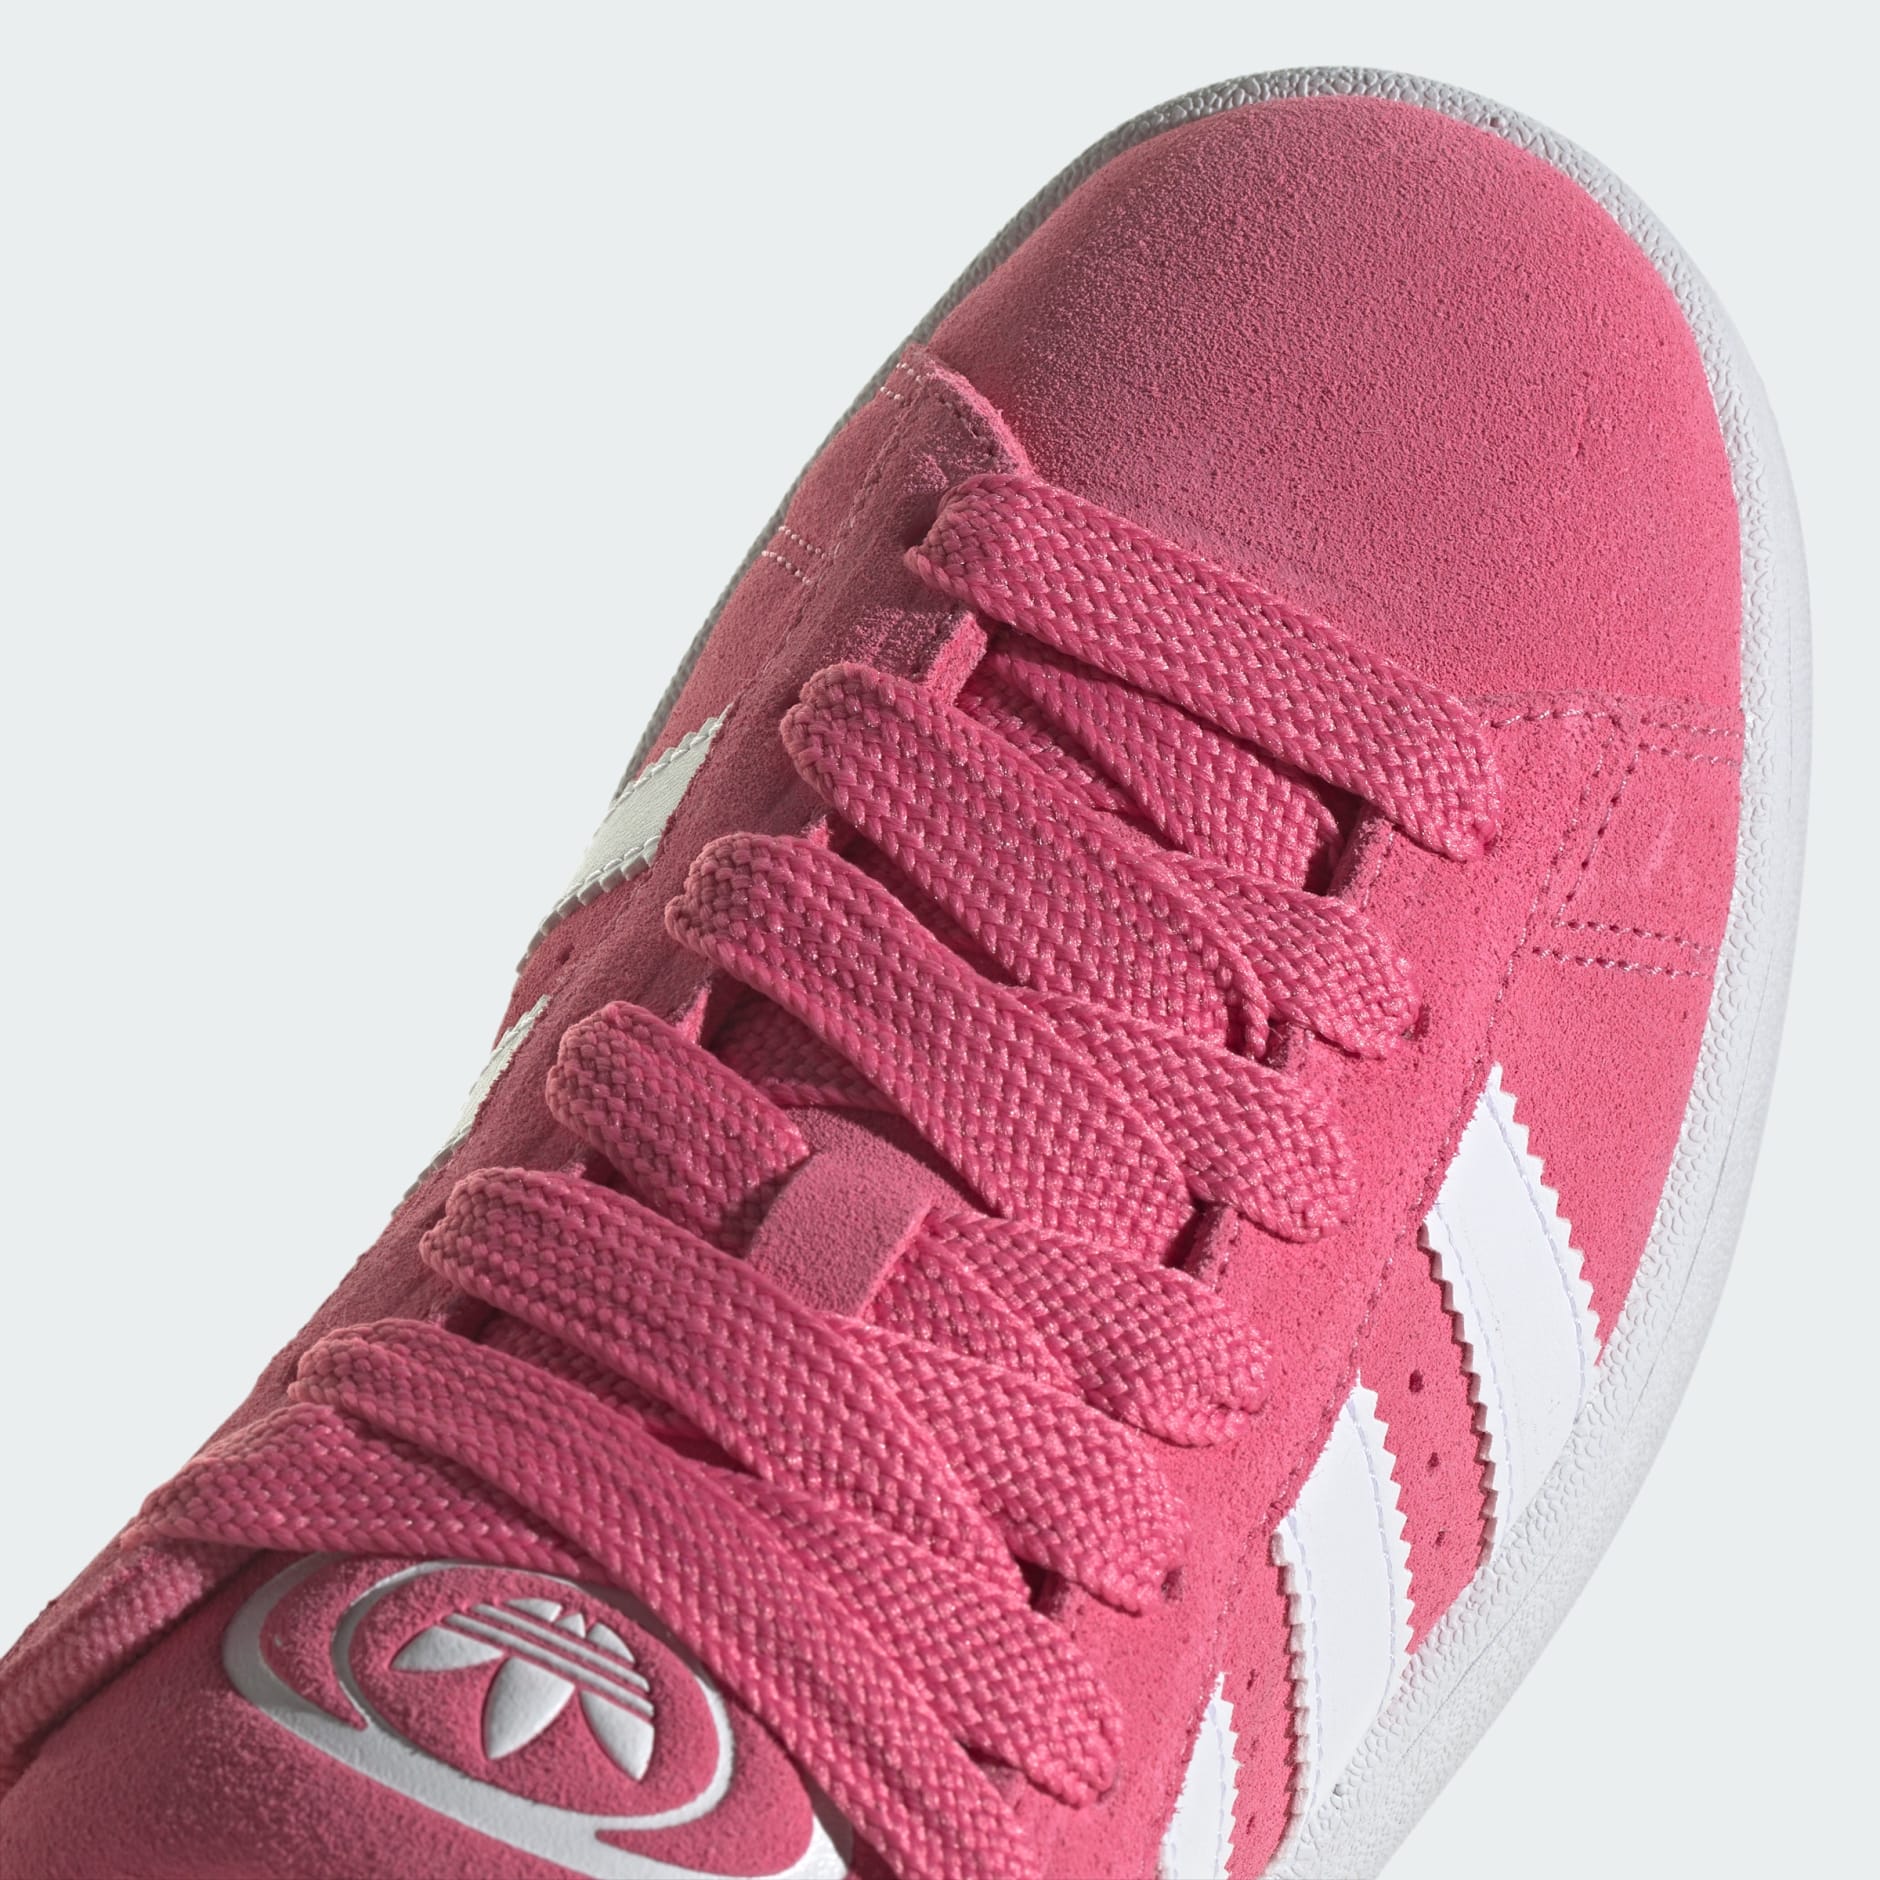 Women's Shoes - Campus 00s Shoes - Pink | adidas Oman